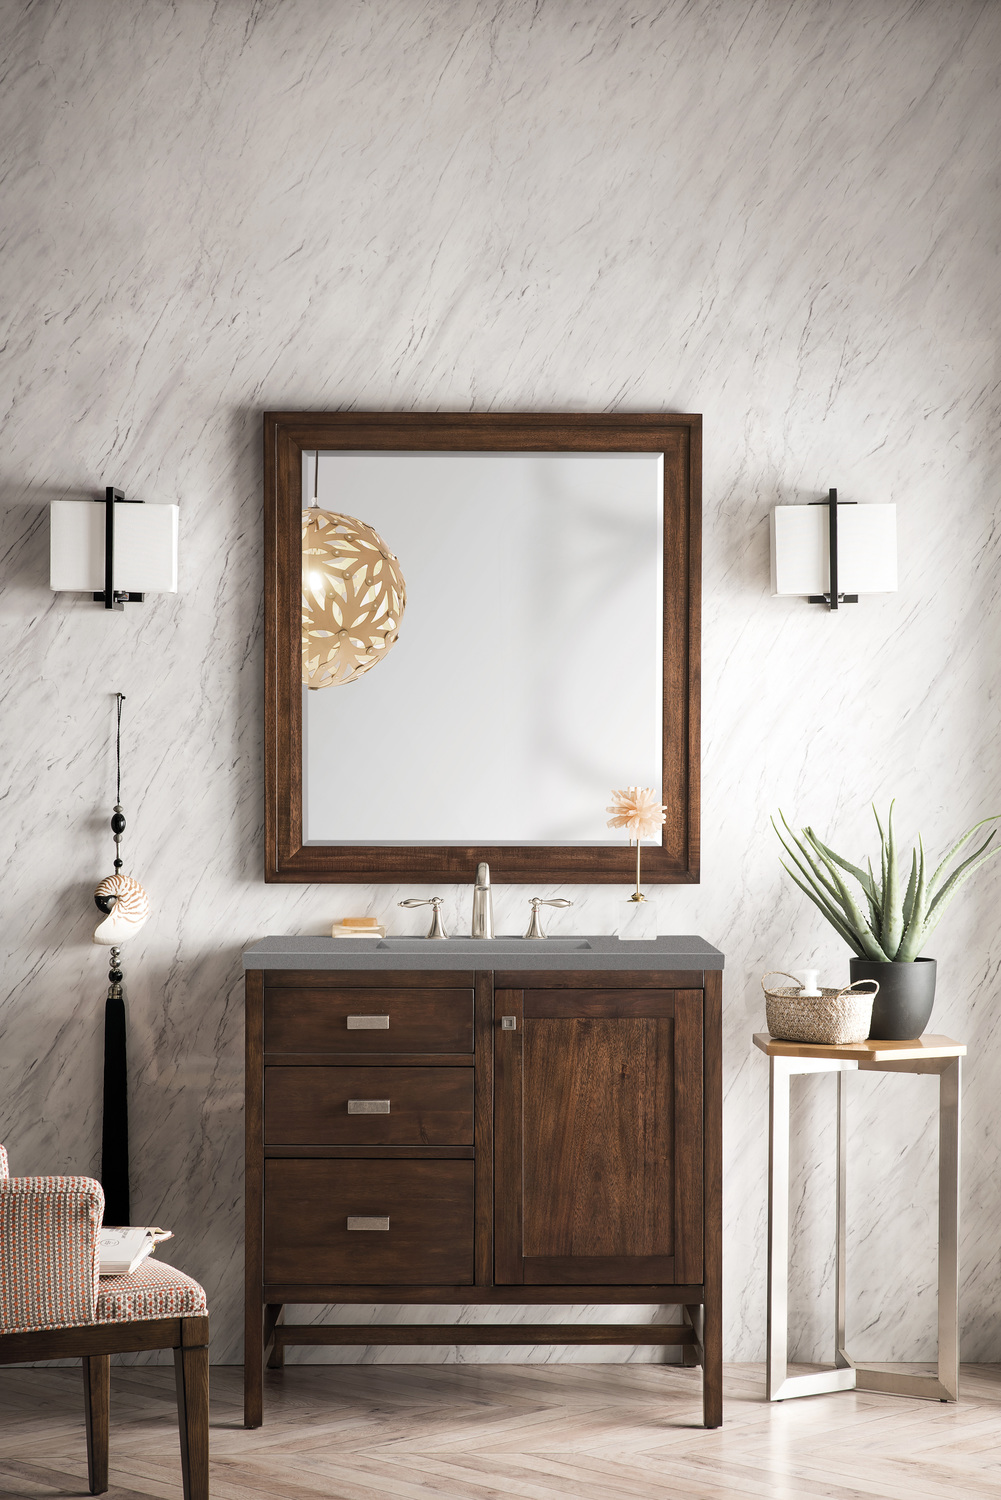 70 inch double sink vanity top James Martin Vanity Mid-Century Acacia Traditional, Transitional